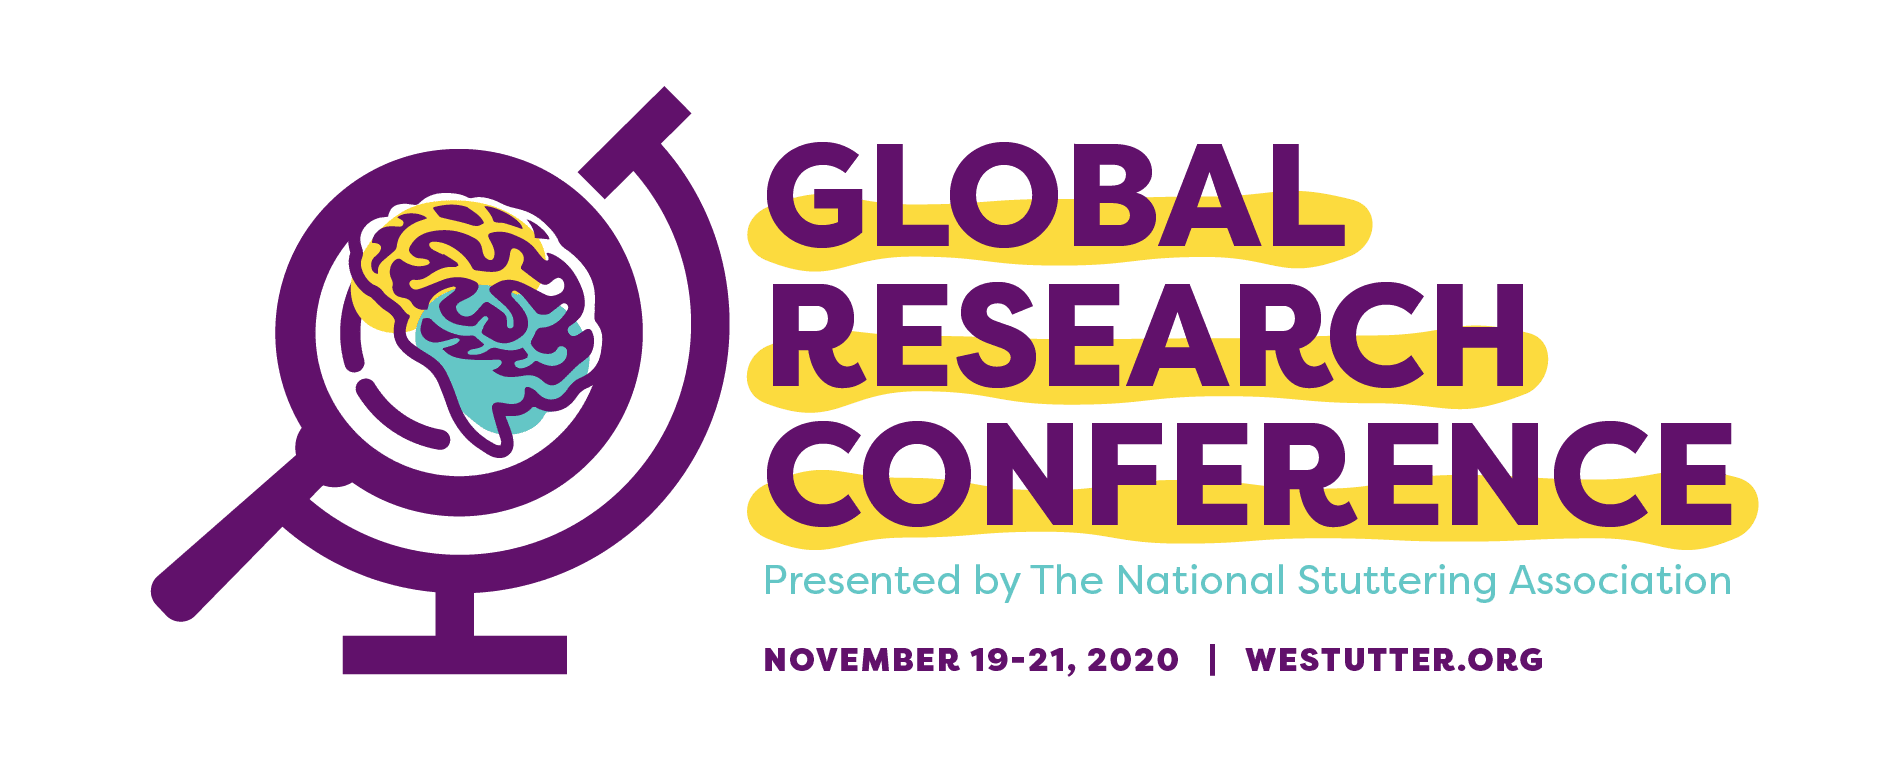 A promotional banner for the global research conference featuring a brain icon inside a magnifying glass. text includes event details and dates, presented by the national stuttering association, with a website url.